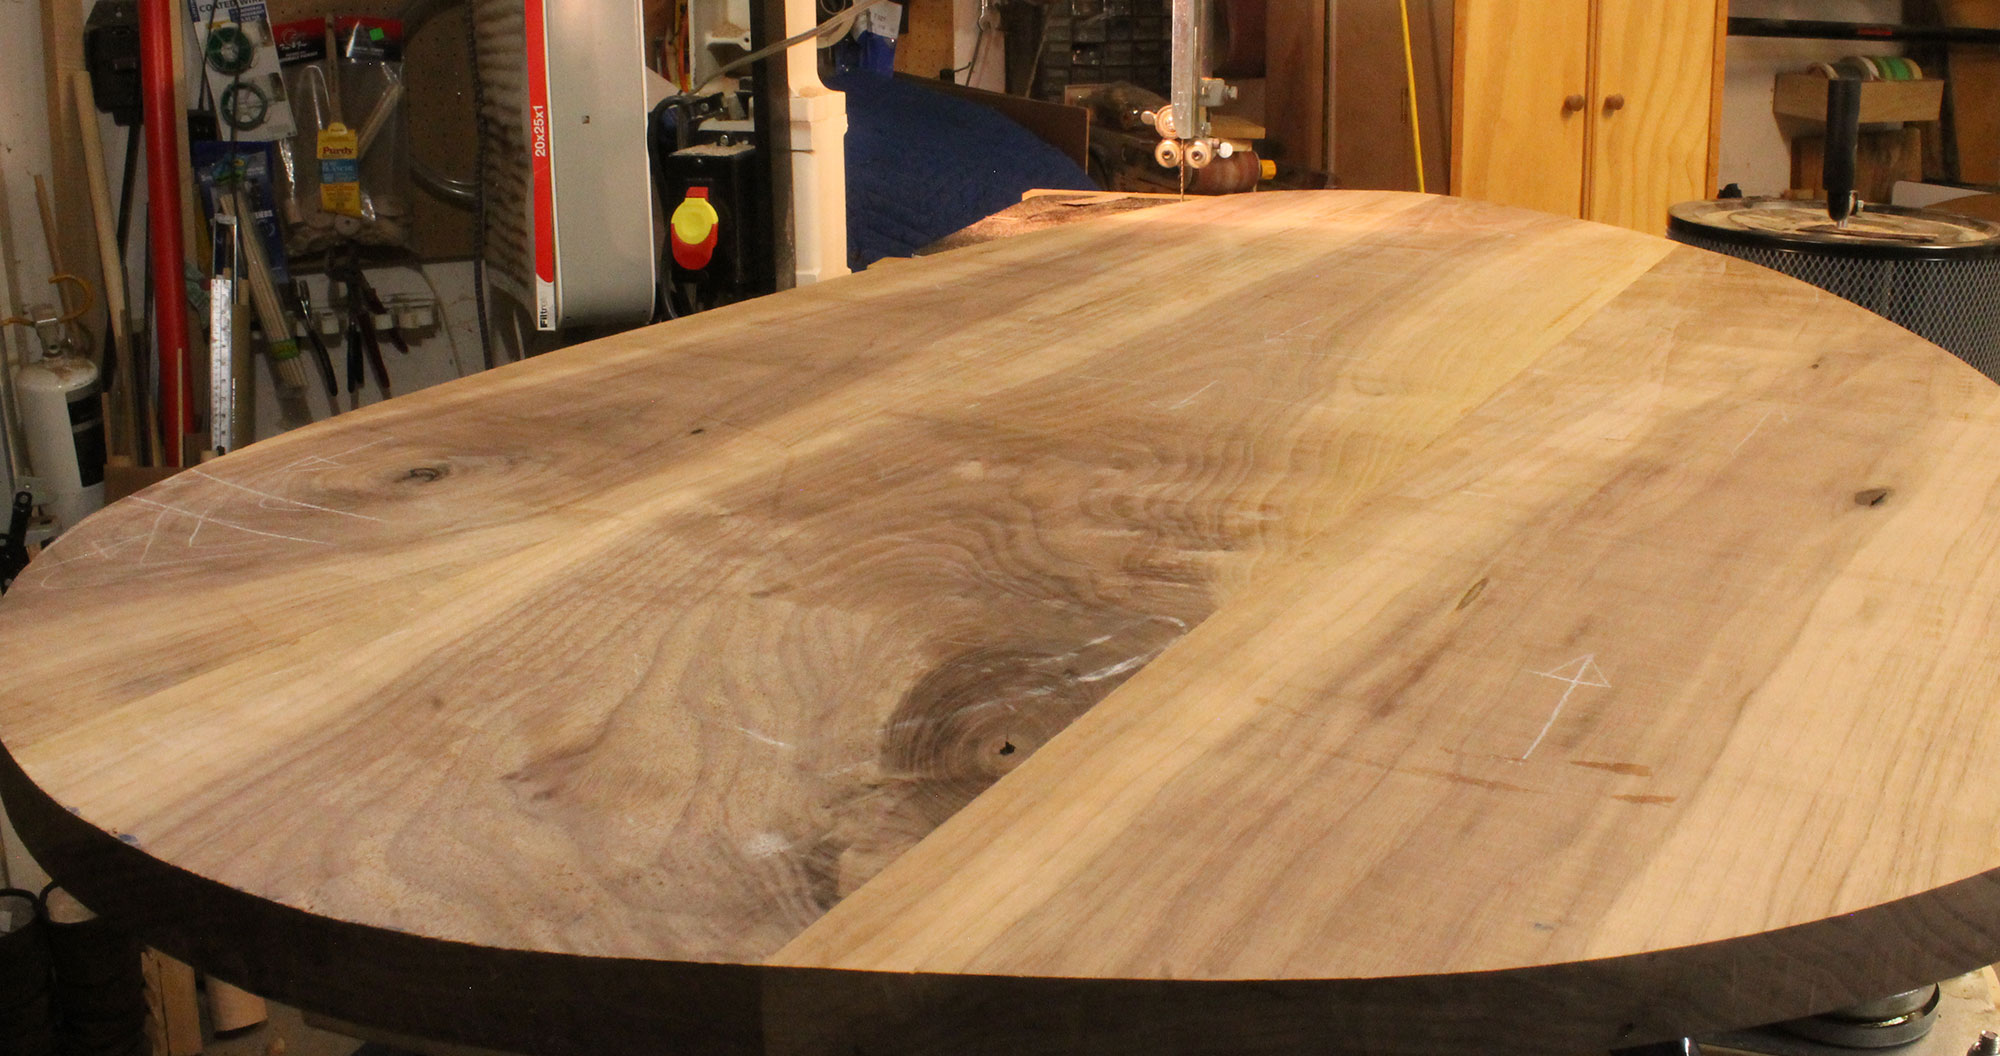 Wooden table top